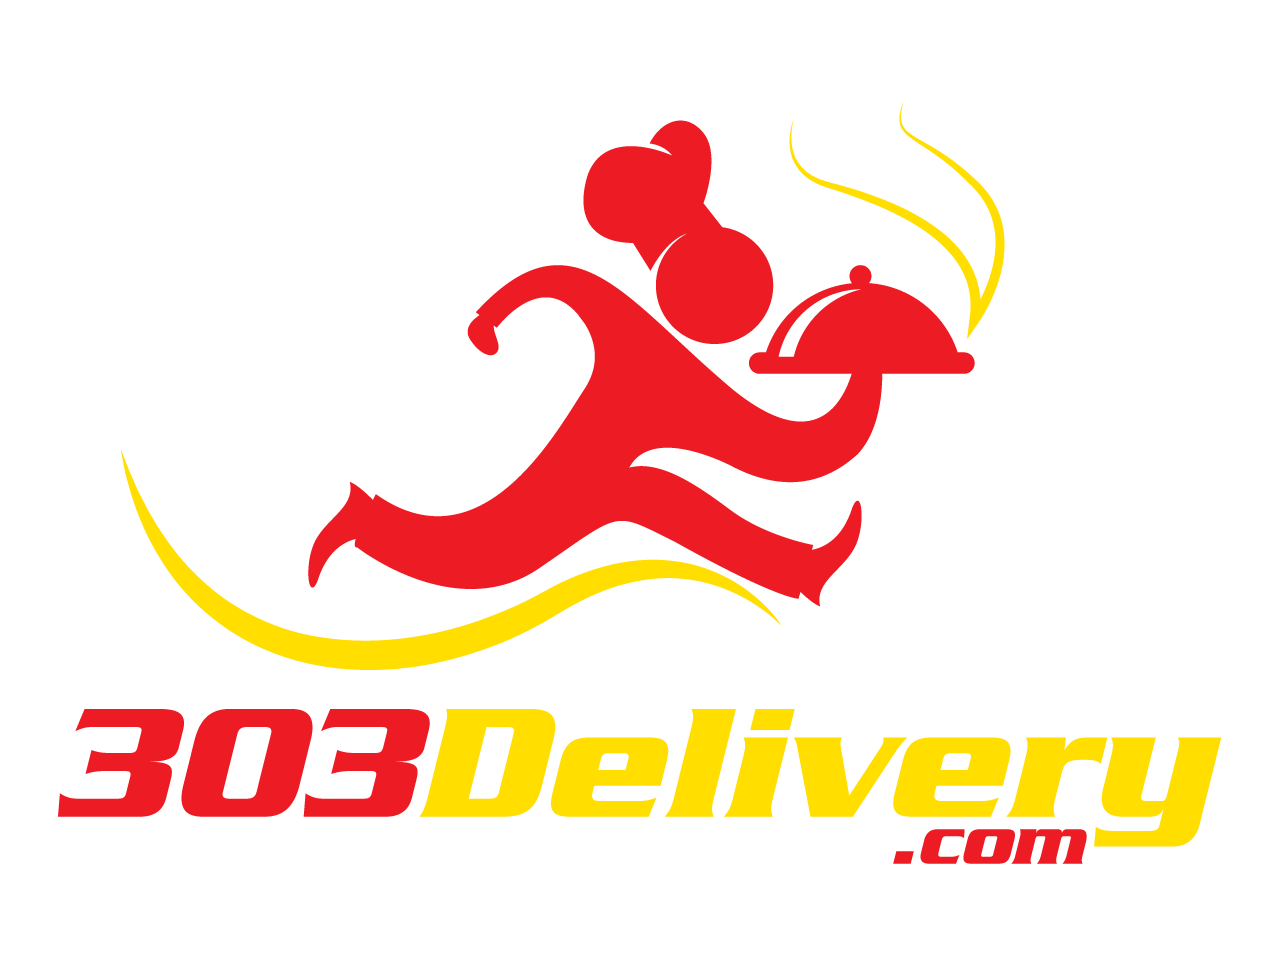 Delivery Logo - 40 Creative Food Delivery Business Logos | Food Delivery Business ...